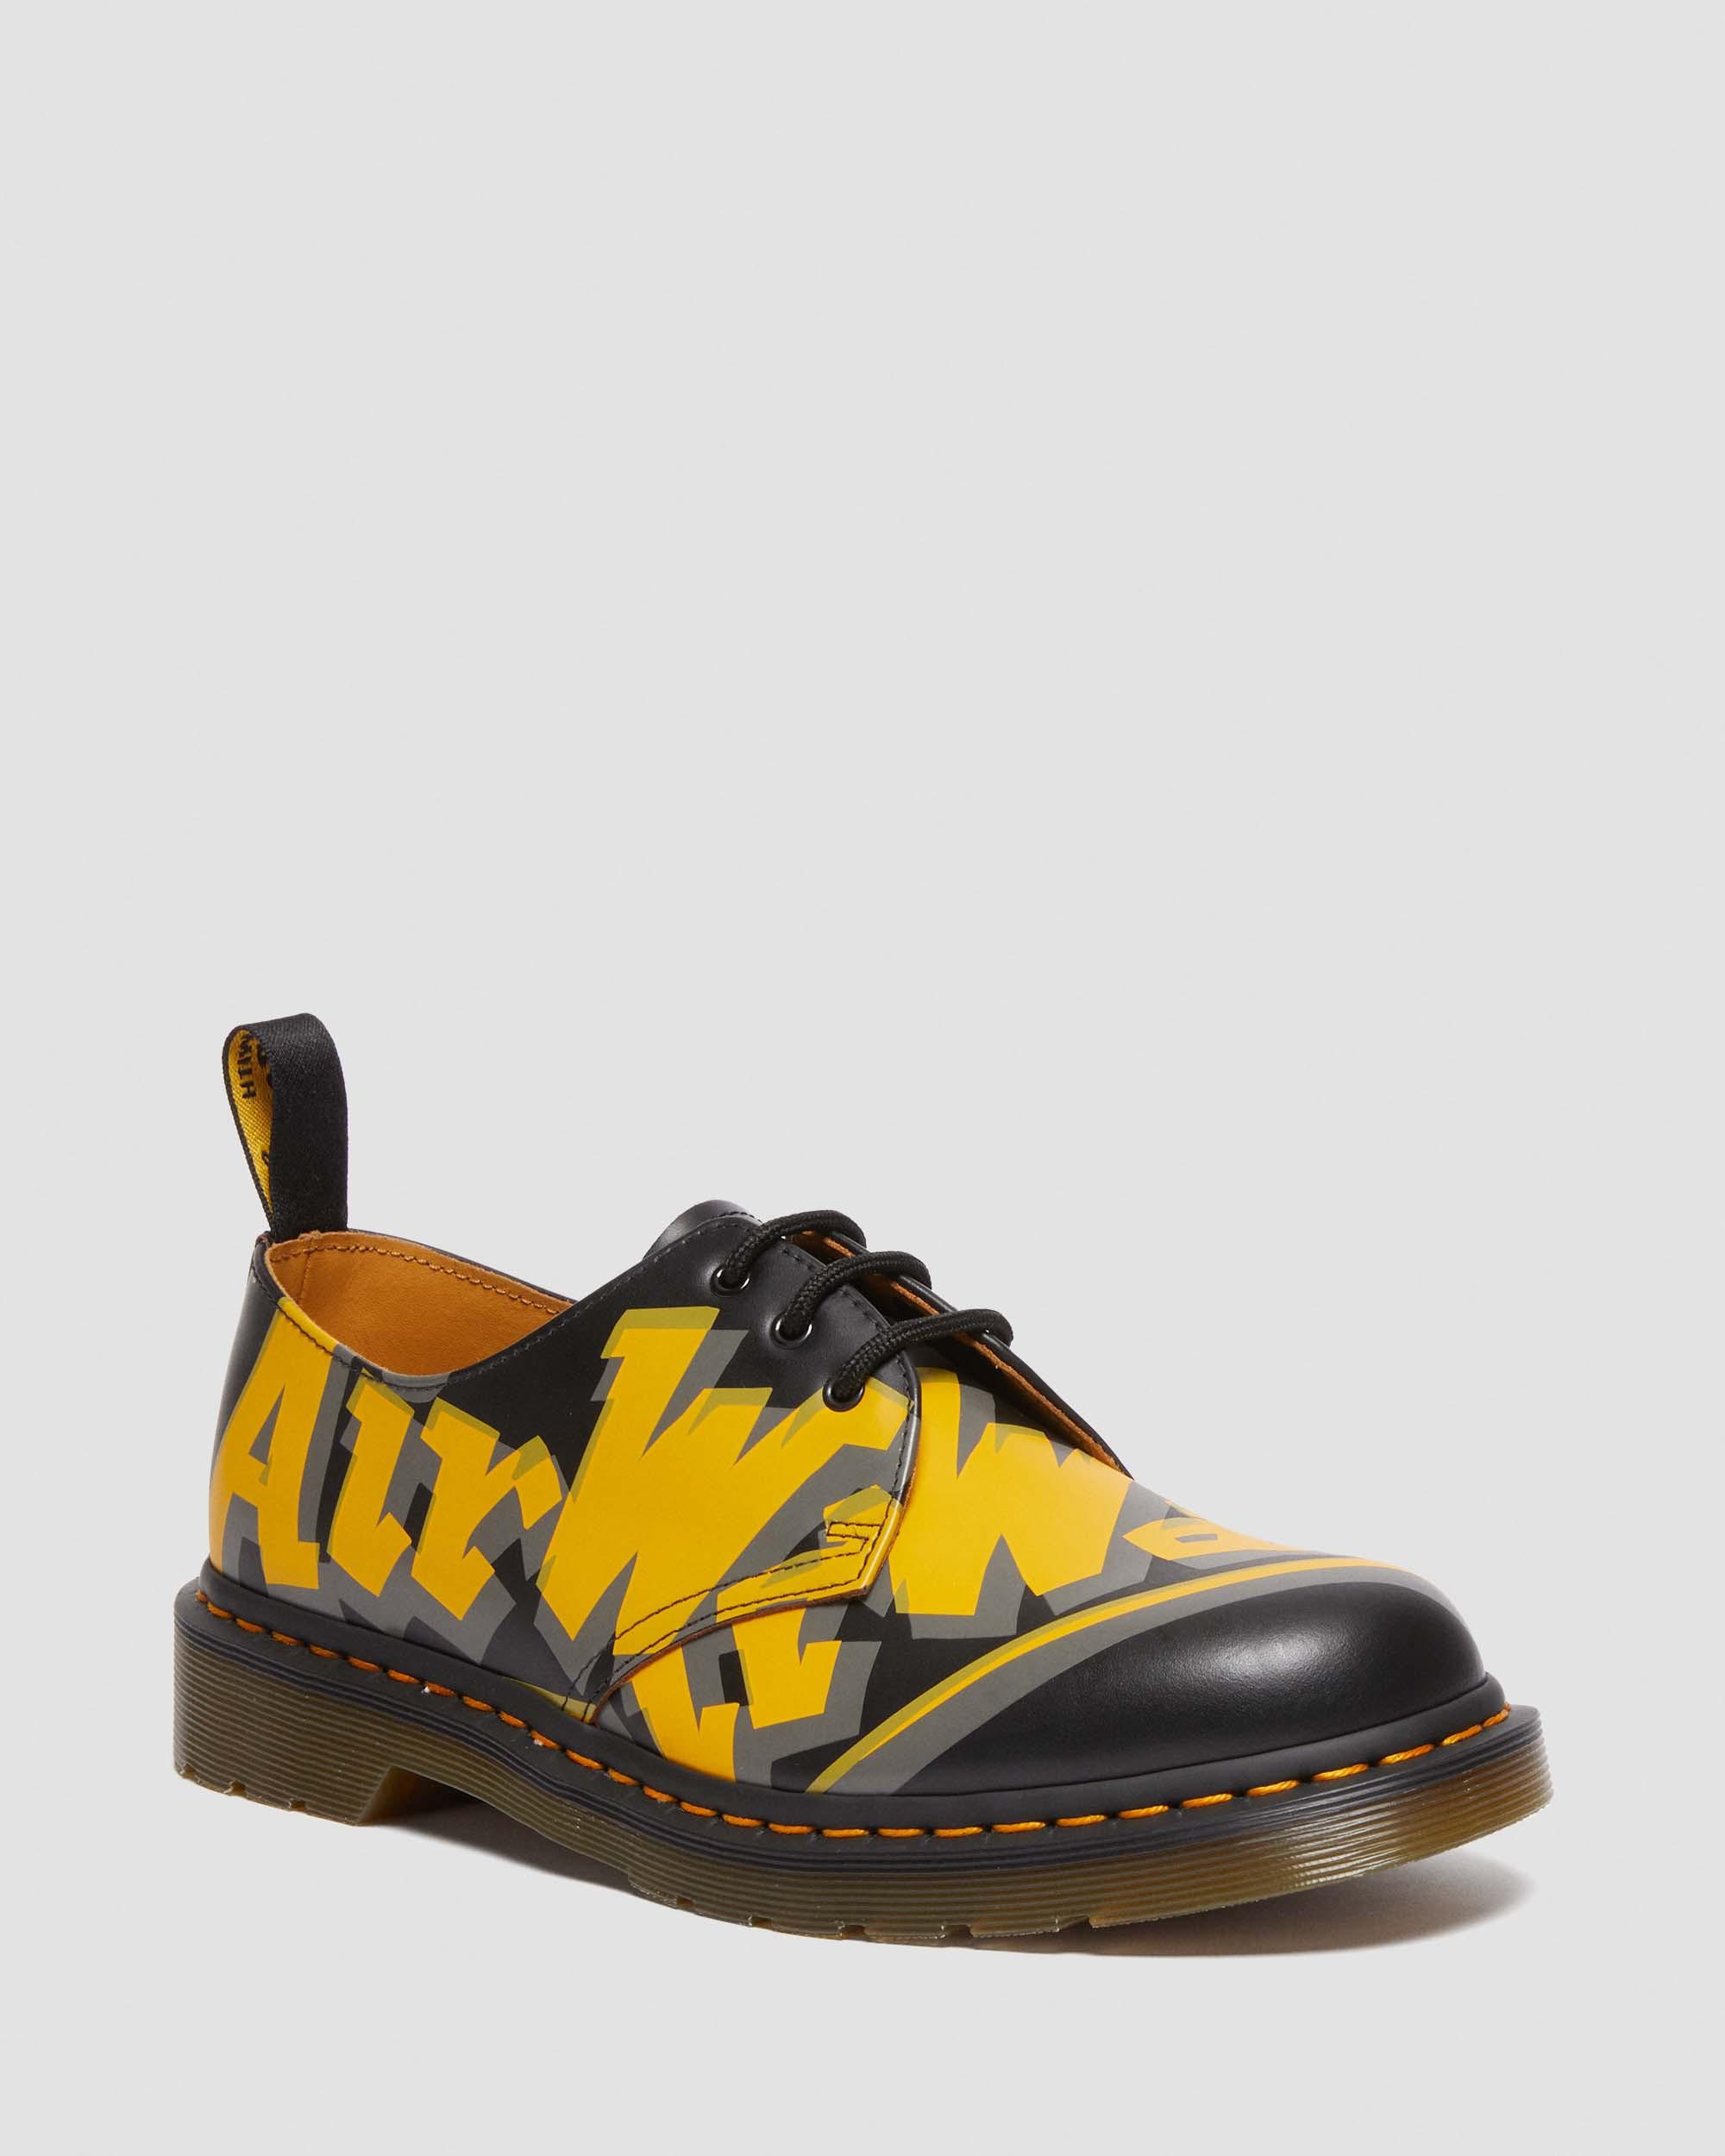 DR MARTENS 1461 Airwair Vintage Smooth Leather Oxford Shoes